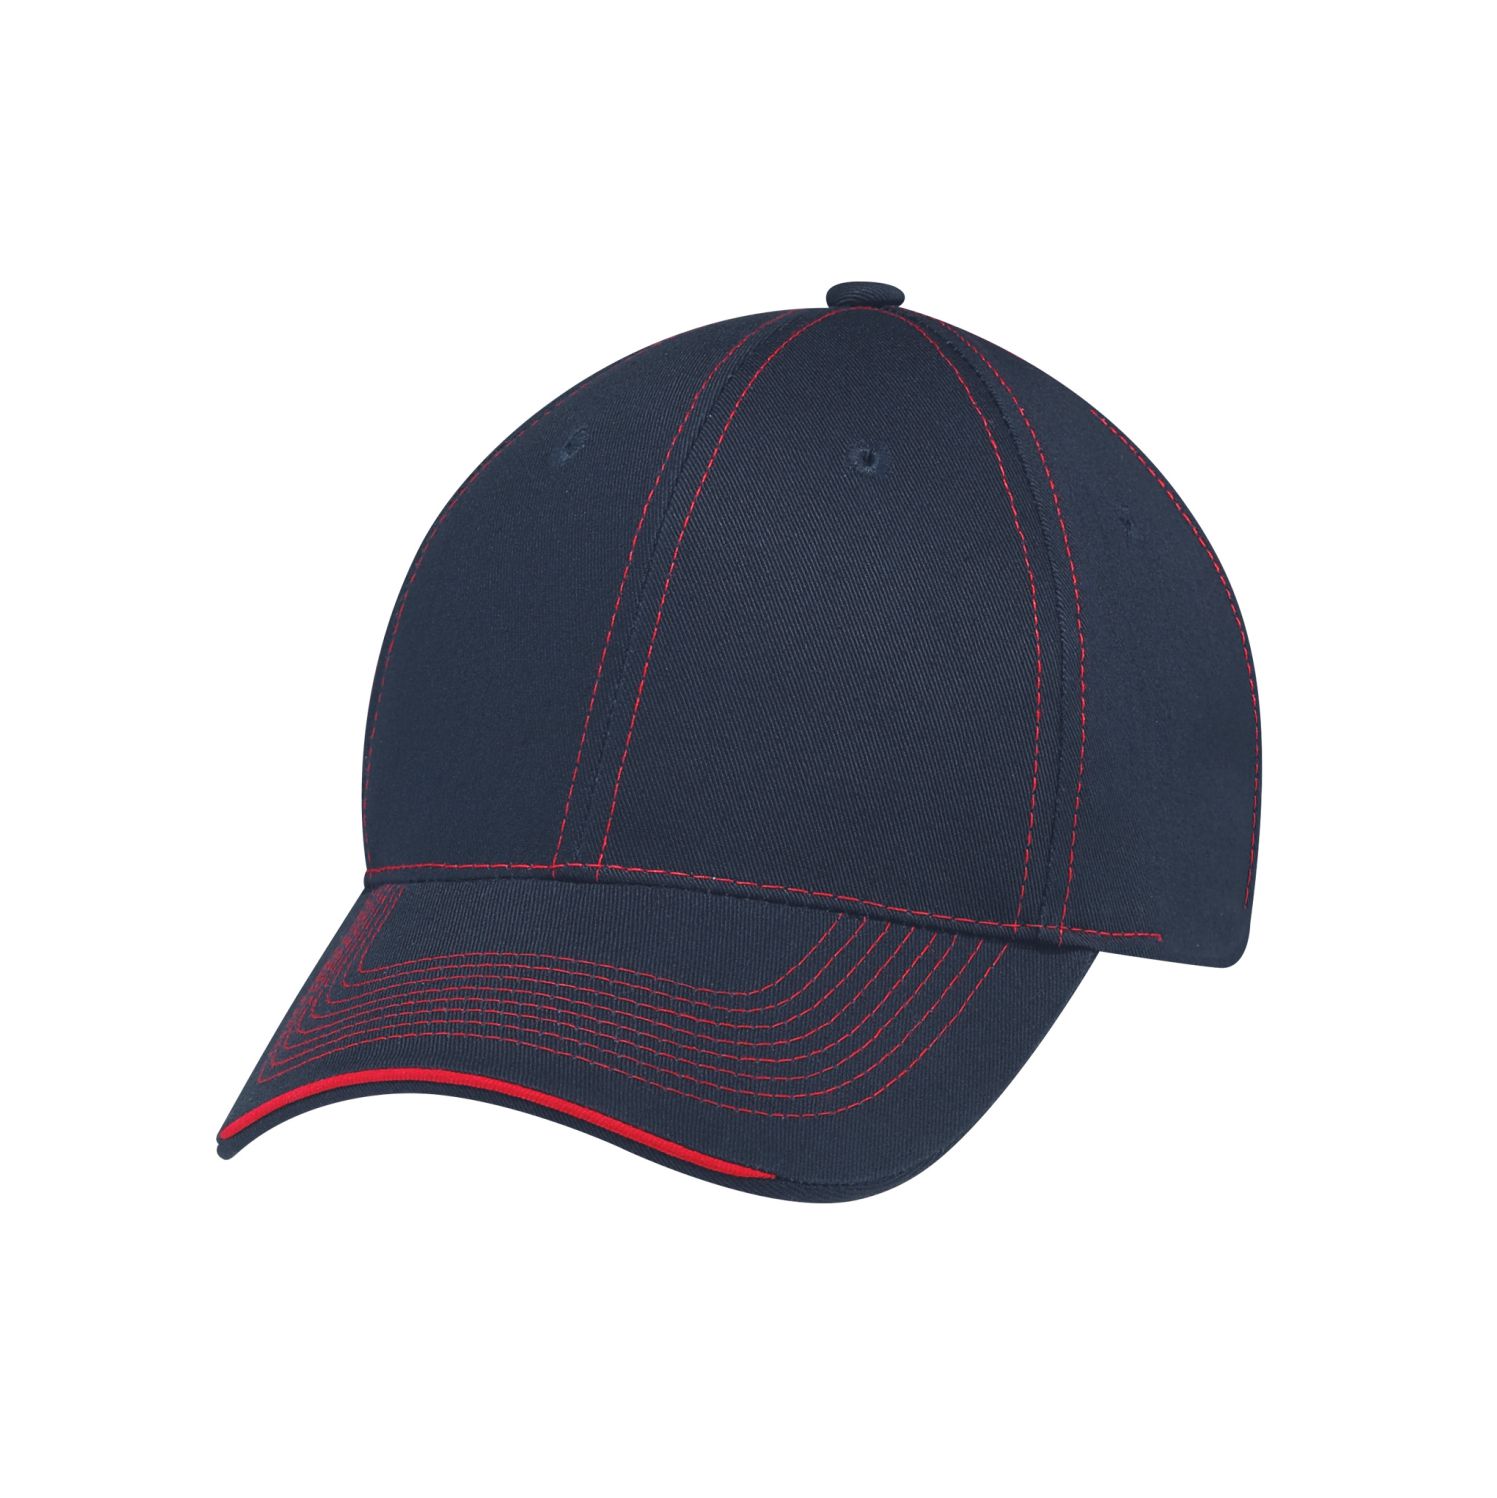 AJM 6-Panel Constructed Full-Fit Hat #6F617M Navy / Red